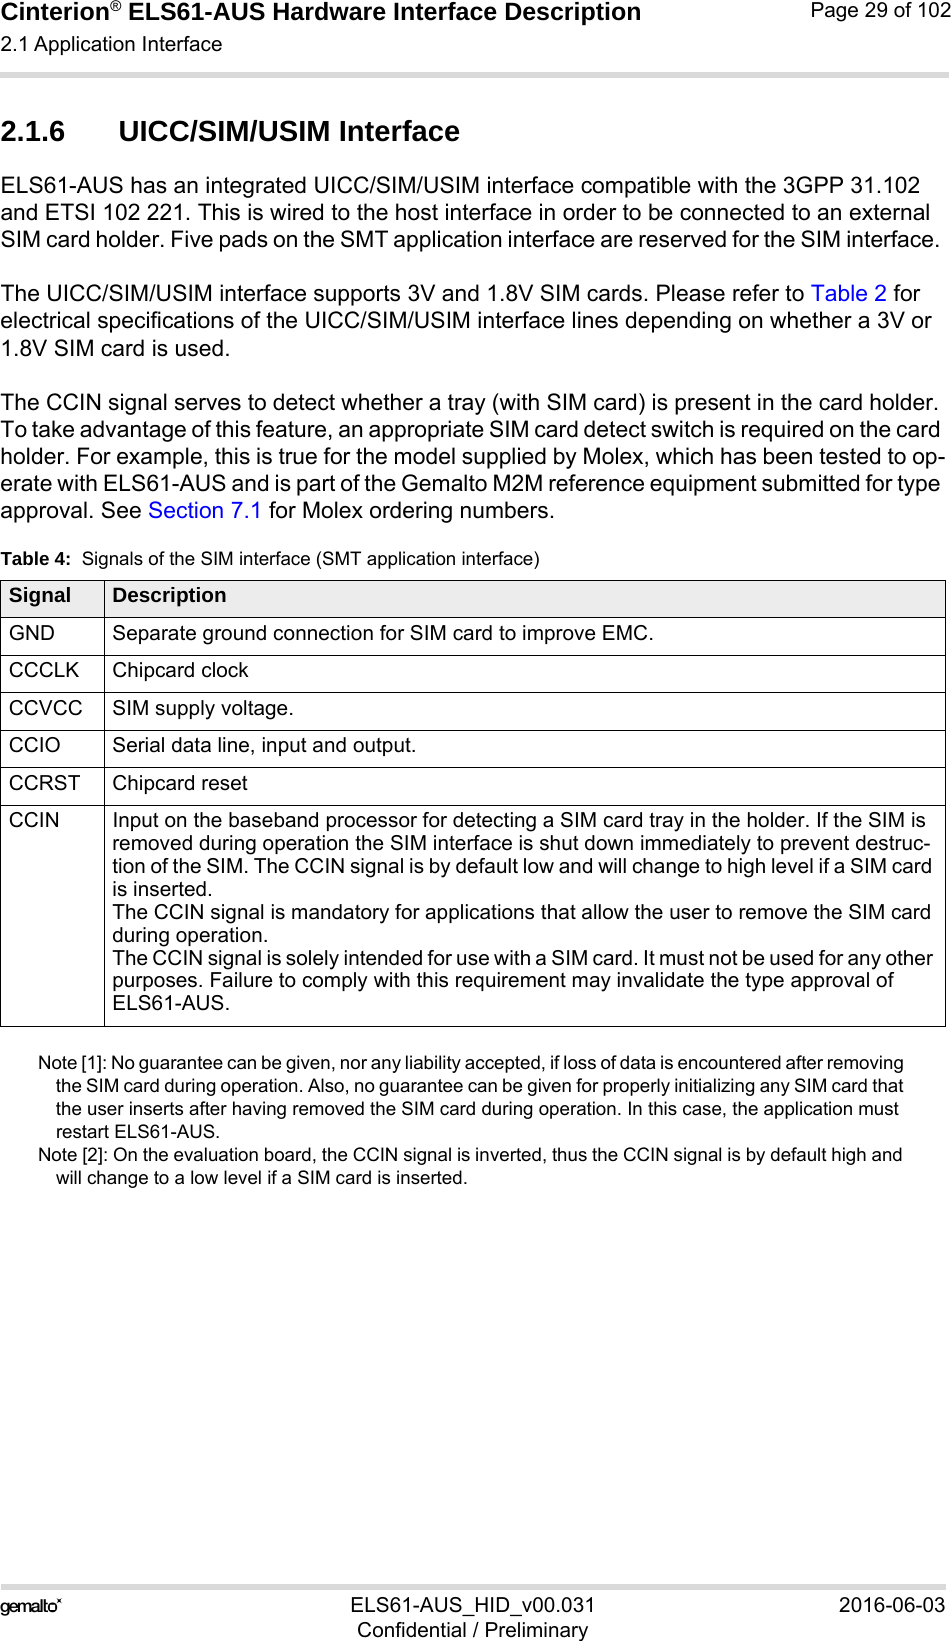 Cinterion® ELS61-AUS Hardware Interface Description2.1 Application Interface52ELS61-AUS_HID_v00.031 2016-06-03Confidential / PreliminaryPage 29 of 1022.1.6 UICC/SIM/USIM InterfaceELS61-AUS has an integrated UICC/SIM/USIM interface compatible with the 3GPP 31.102 and ETSI 102 221. This is wired to the host interface in order to be connected to an external SIM card holder. Five pads on the SMT application interface are reserved for the SIM interface. The UICC/SIM/USIM interface supports 3V and 1.8V SIM cards. Please refer to Table 2 for electrical specifications of the UICC/SIM/USIM interface lines depending on whether a 3V or 1.8V SIM card is used.The CCIN signal serves to detect whether a tray (with SIM card) is present in the card holder. To take advantage of this feature, an appropriate SIM card detect switch is required on the card holder. For example, this is true for the model supplied by Molex, which has been tested to op-erate with ELS61-AUS and is part of the Gemalto M2M reference equipment submitted for type approval. See Section 7.1 for Molex ordering numbers.Note [1]: No guarantee can be given, nor any liability accepted, if loss of data is encountered after removing the SIM card during operation. Also, no guarantee can be given for properly initializing any SIM card that the user inserts after having removed the SIM card during operation. In this case, the application must restart ELS61-AUS.Note [2]: On the evaluation board, the CCIN signal is inverted, thus the CCIN signal is by default high and will change to a low level if a SIM card is inserted. Table 4:  Signals of the SIM interface (SMT application interface)Signal DescriptionGND Separate ground connection for SIM card to improve EMC.CCCLK Chipcard clockCCVCC SIM supply voltage.CCIO Serial data line, input and output.CCRST Chipcard resetCCIN Input on the baseband processor for detecting a SIM card tray in the holder. If the SIM is removed during operation the SIM interface is shut down immediately to prevent destruc-tion of the SIM. The CCIN signal is by default low and will change to high level if a SIM card is inserted.The CCIN signal is mandatory for applications that allow the user to remove the SIM card during operation. The CCIN signal is solely intended for use with a SIM card. It must not be used for any other purposes. Failure to comply with this requirement may invalidate the type approval of ELS61-AUS.